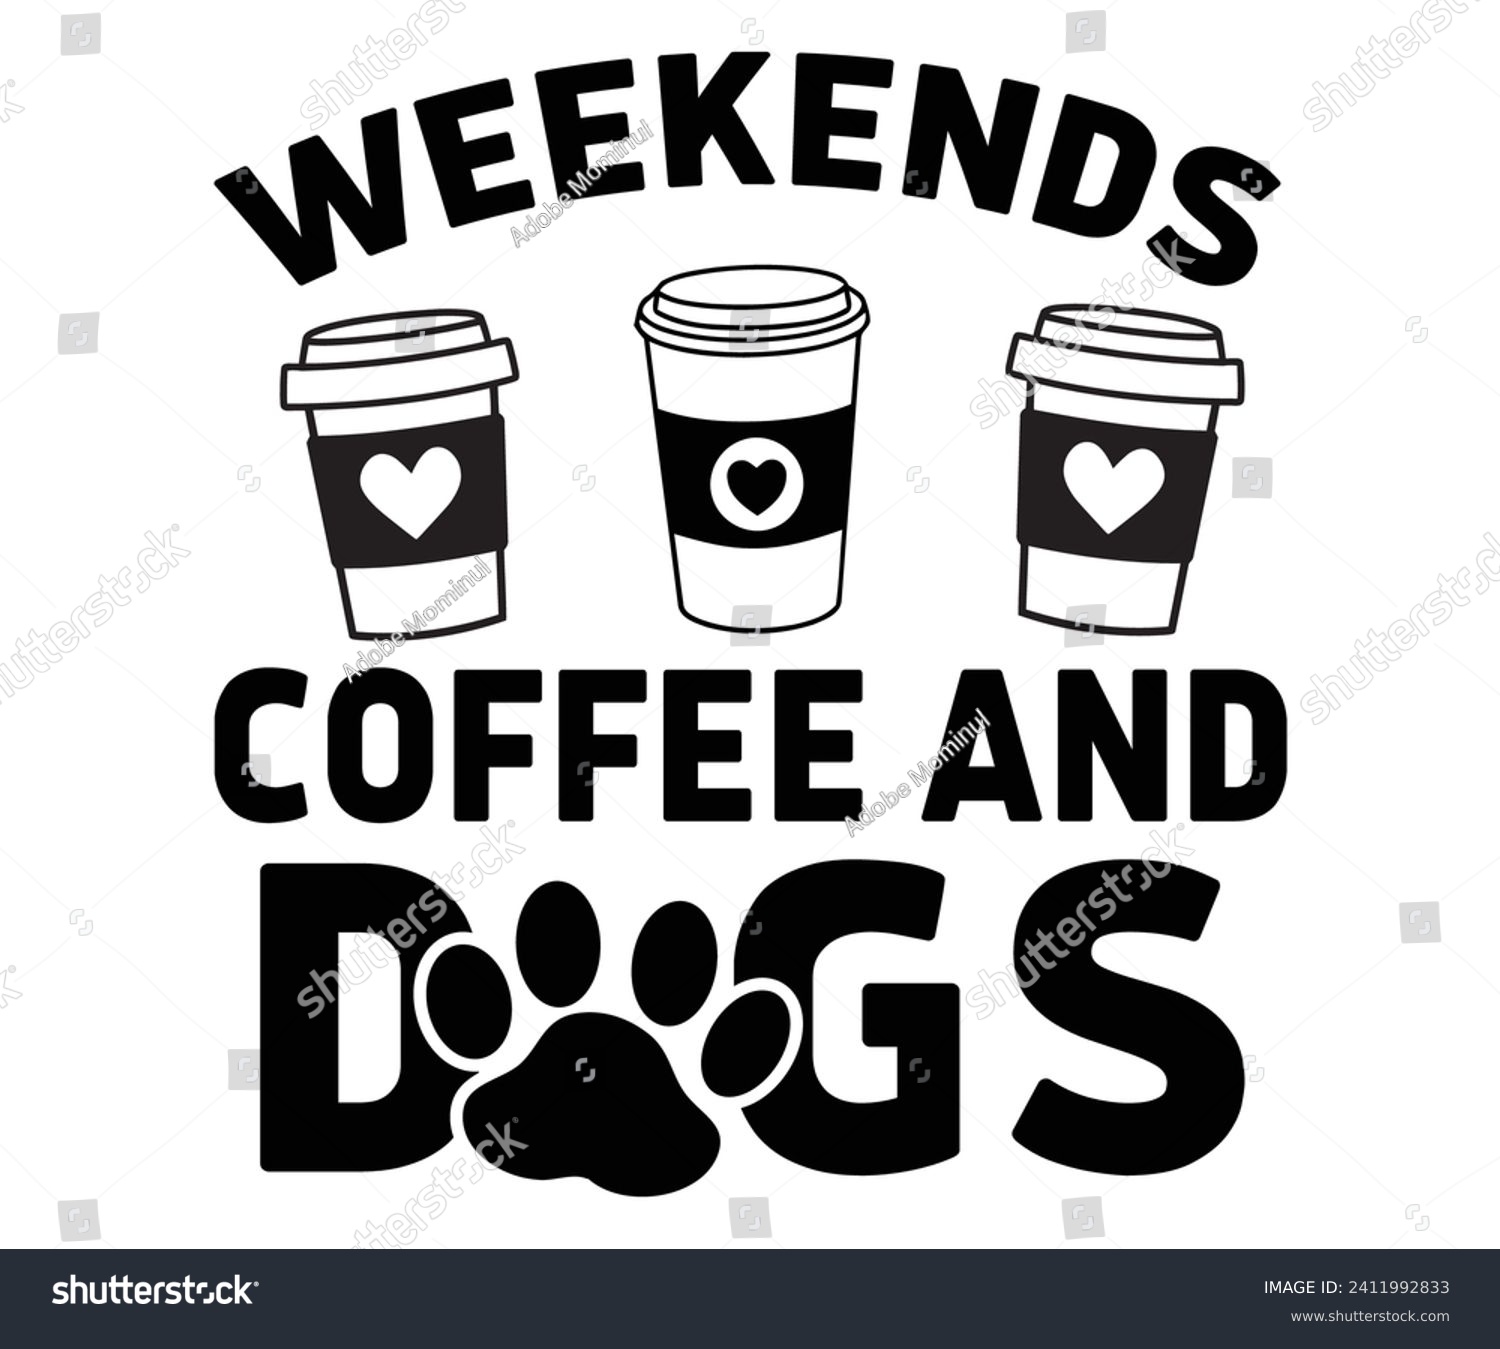 SVG of Weekend Coffee Dogs Svg,Mothers Day Svg,Mom Quotes Svg,Typography,Funny Mom Svg,Gift For Mom Svg,Mom life Svg,Mama Svg,Mommy T-shirt Design,Svg Cut File,Dog Mom deisn,Commercial use,New Mom gift, svg